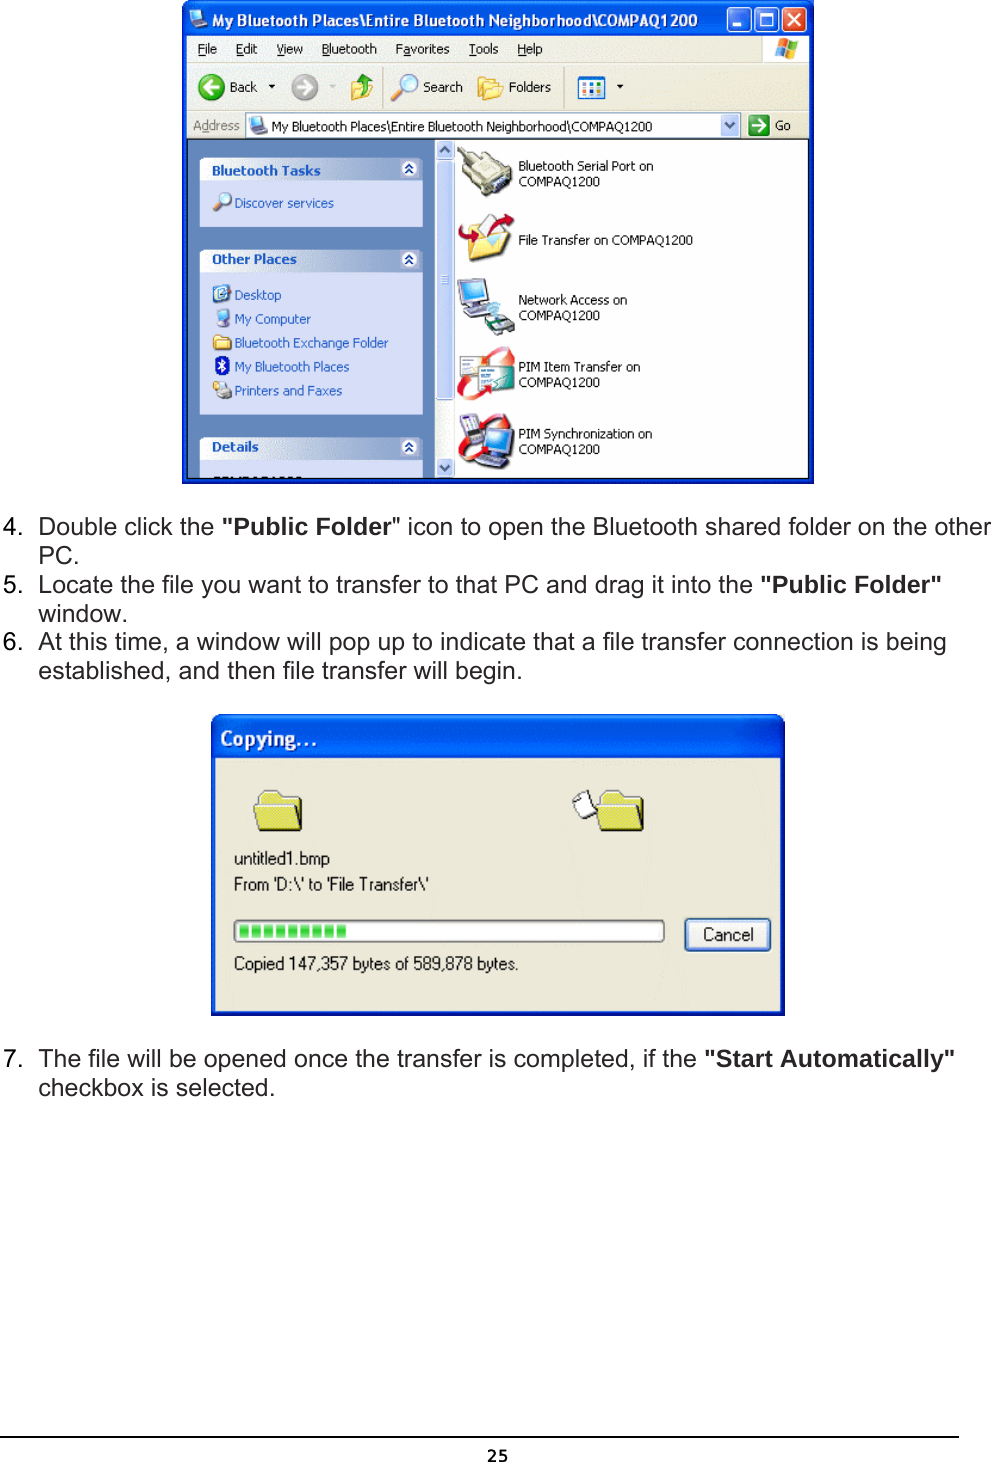   25 4.  Double click the &quot;Public Folder&quot; icon to open the Bluetooth shared folder on the other PC. 5.  Locate the file you want to transfer to that PC and drag it into the &quot;Public Folder&quot; window. 6.  At this time, a window will pop up to indicate that a file transfer connection is being established, and then file transfer will begin.  7.  The file will be opened once the transfer is completed, if the &quot;Start Automatically&quot; checkbox is selected. 